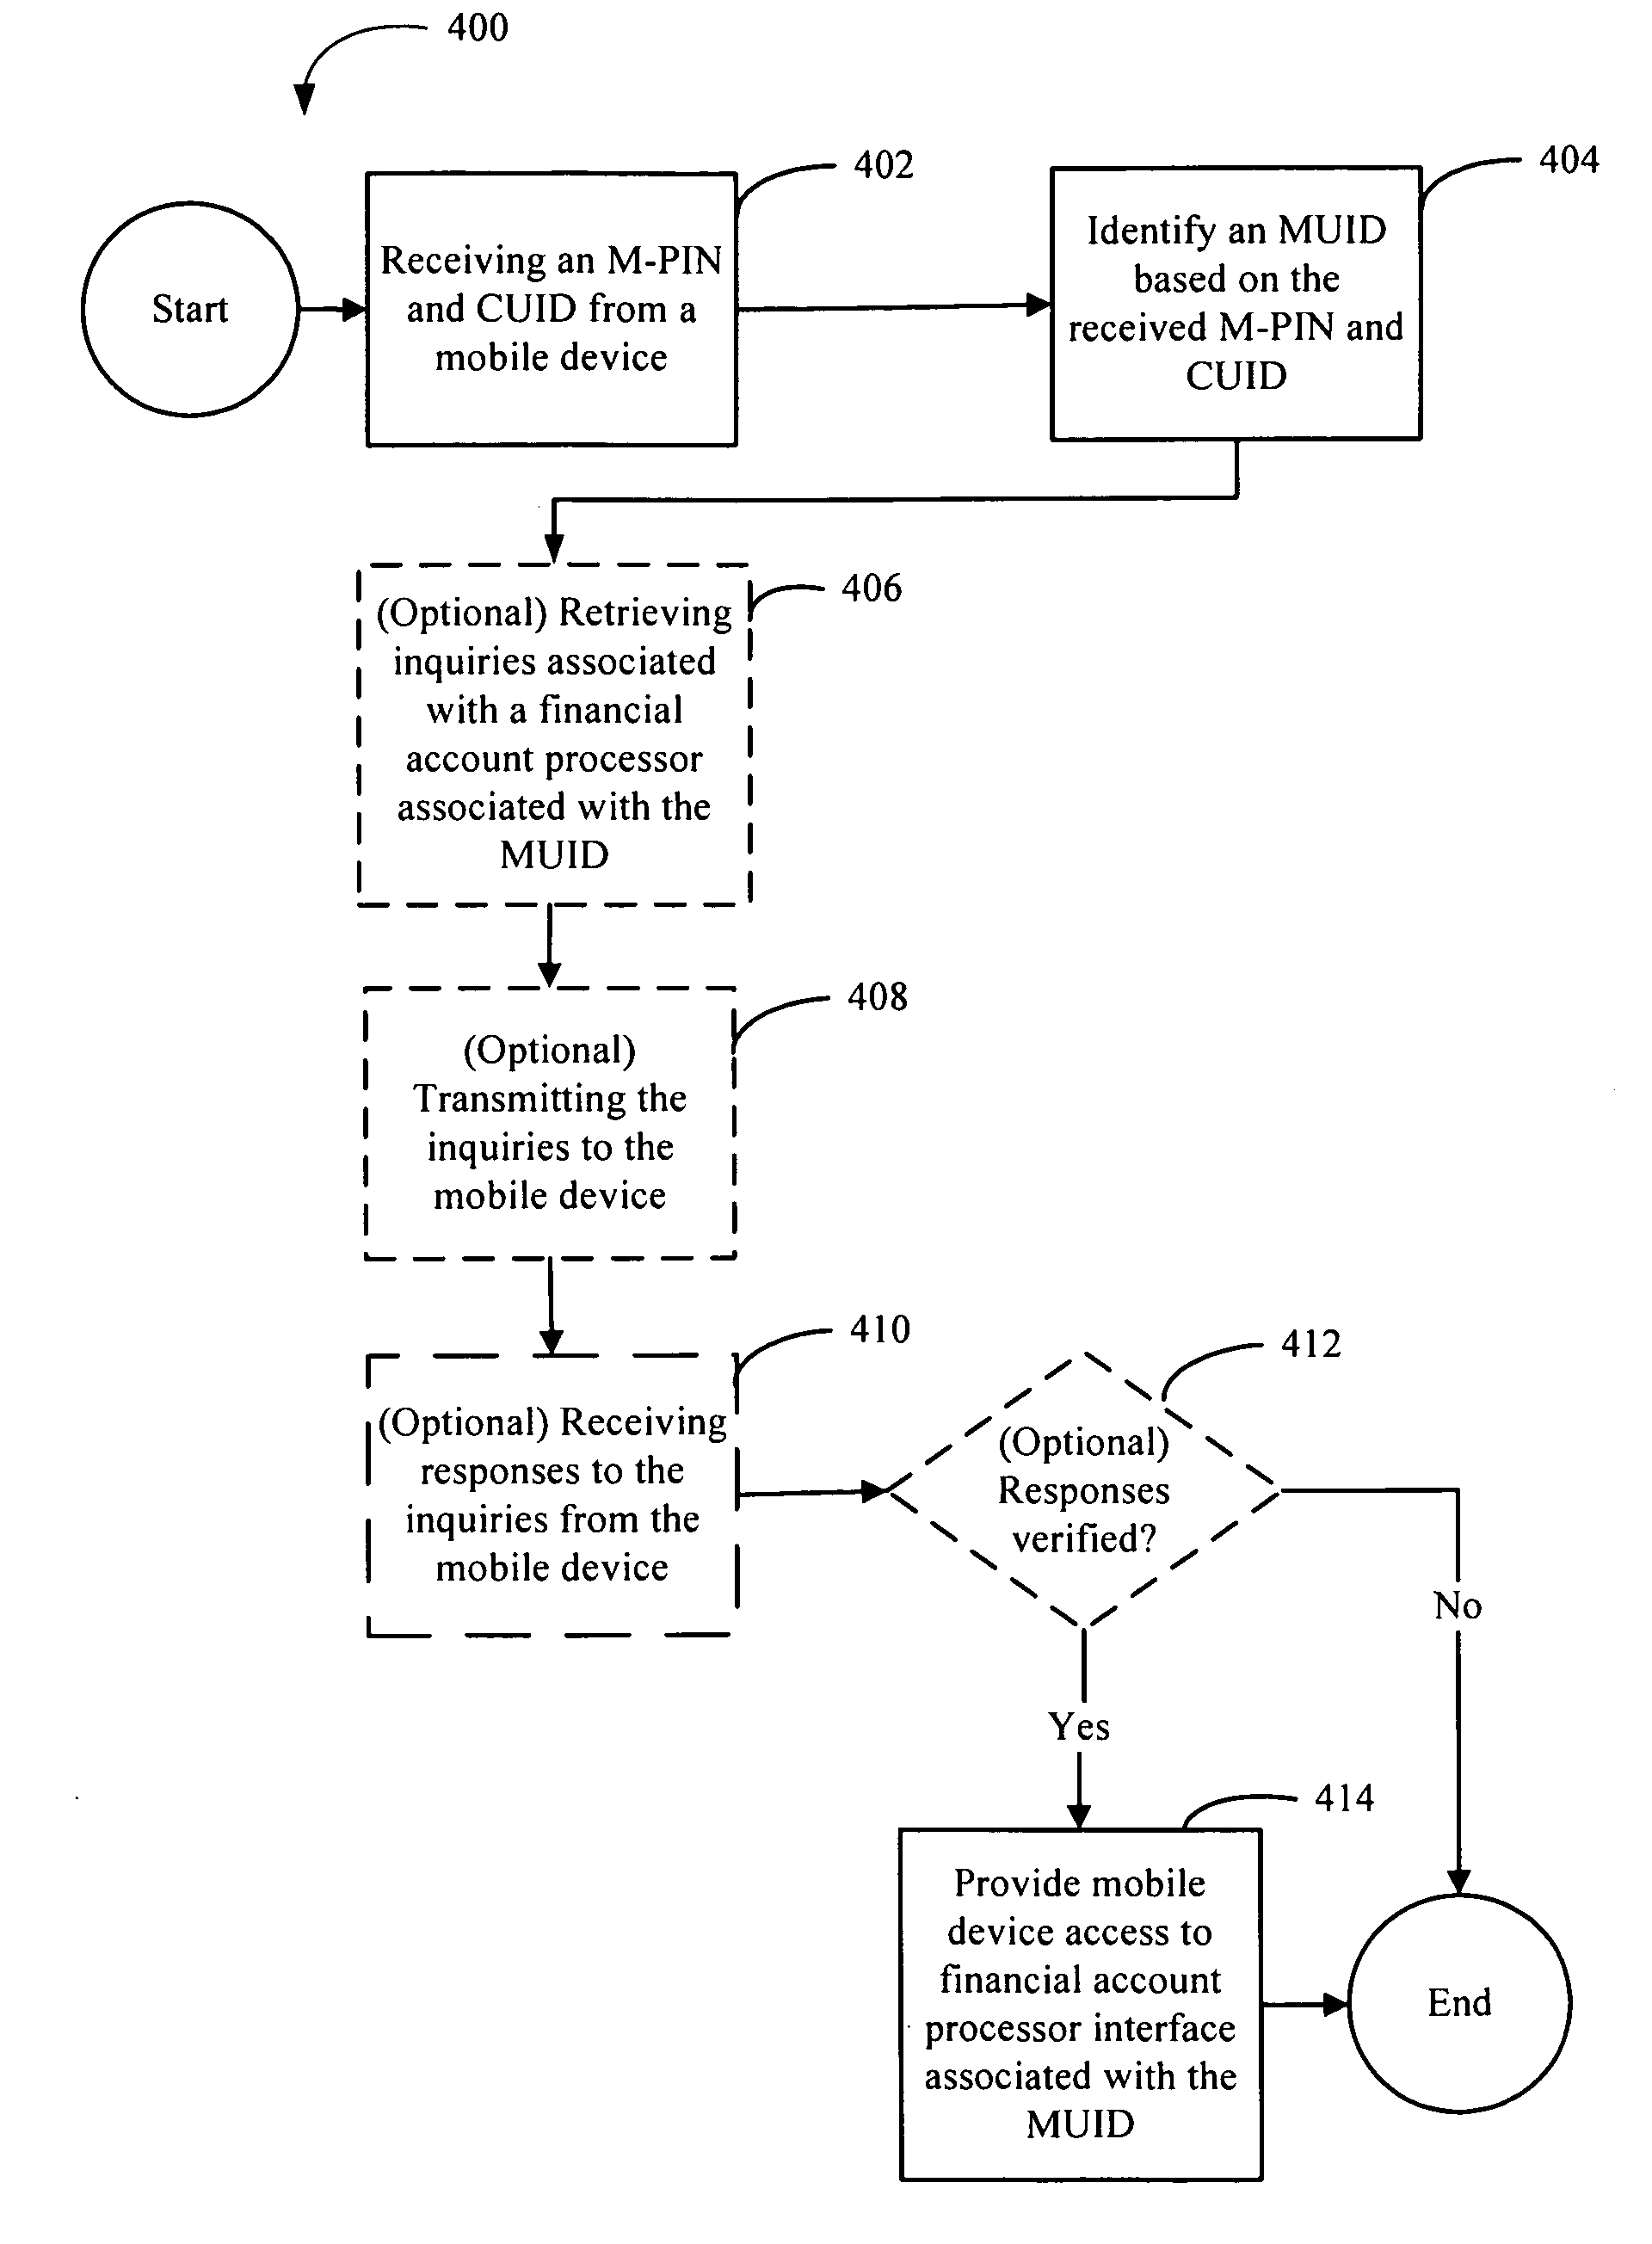 Systems and methods for financial account access for a mobile device via a gateway